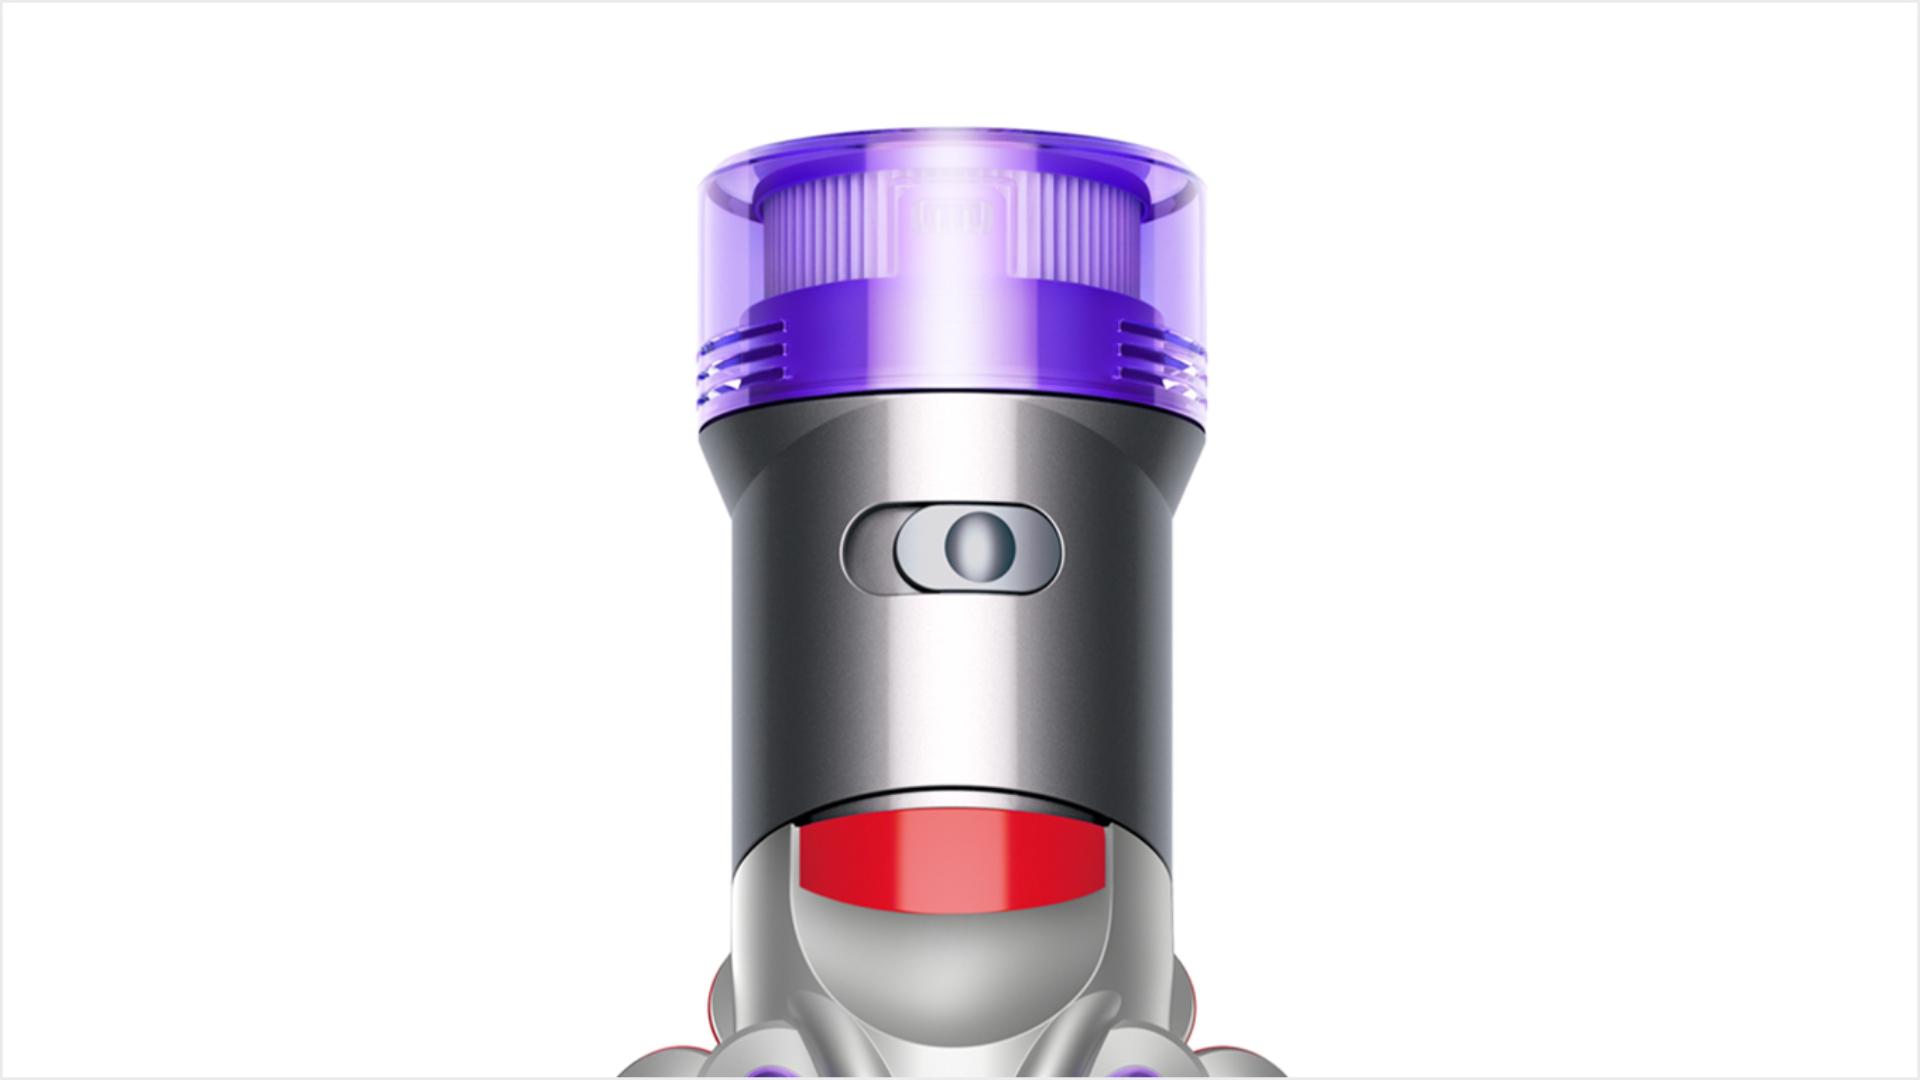 A top view of the Dyson V8 Focus handheld head, focused on the power mode button.